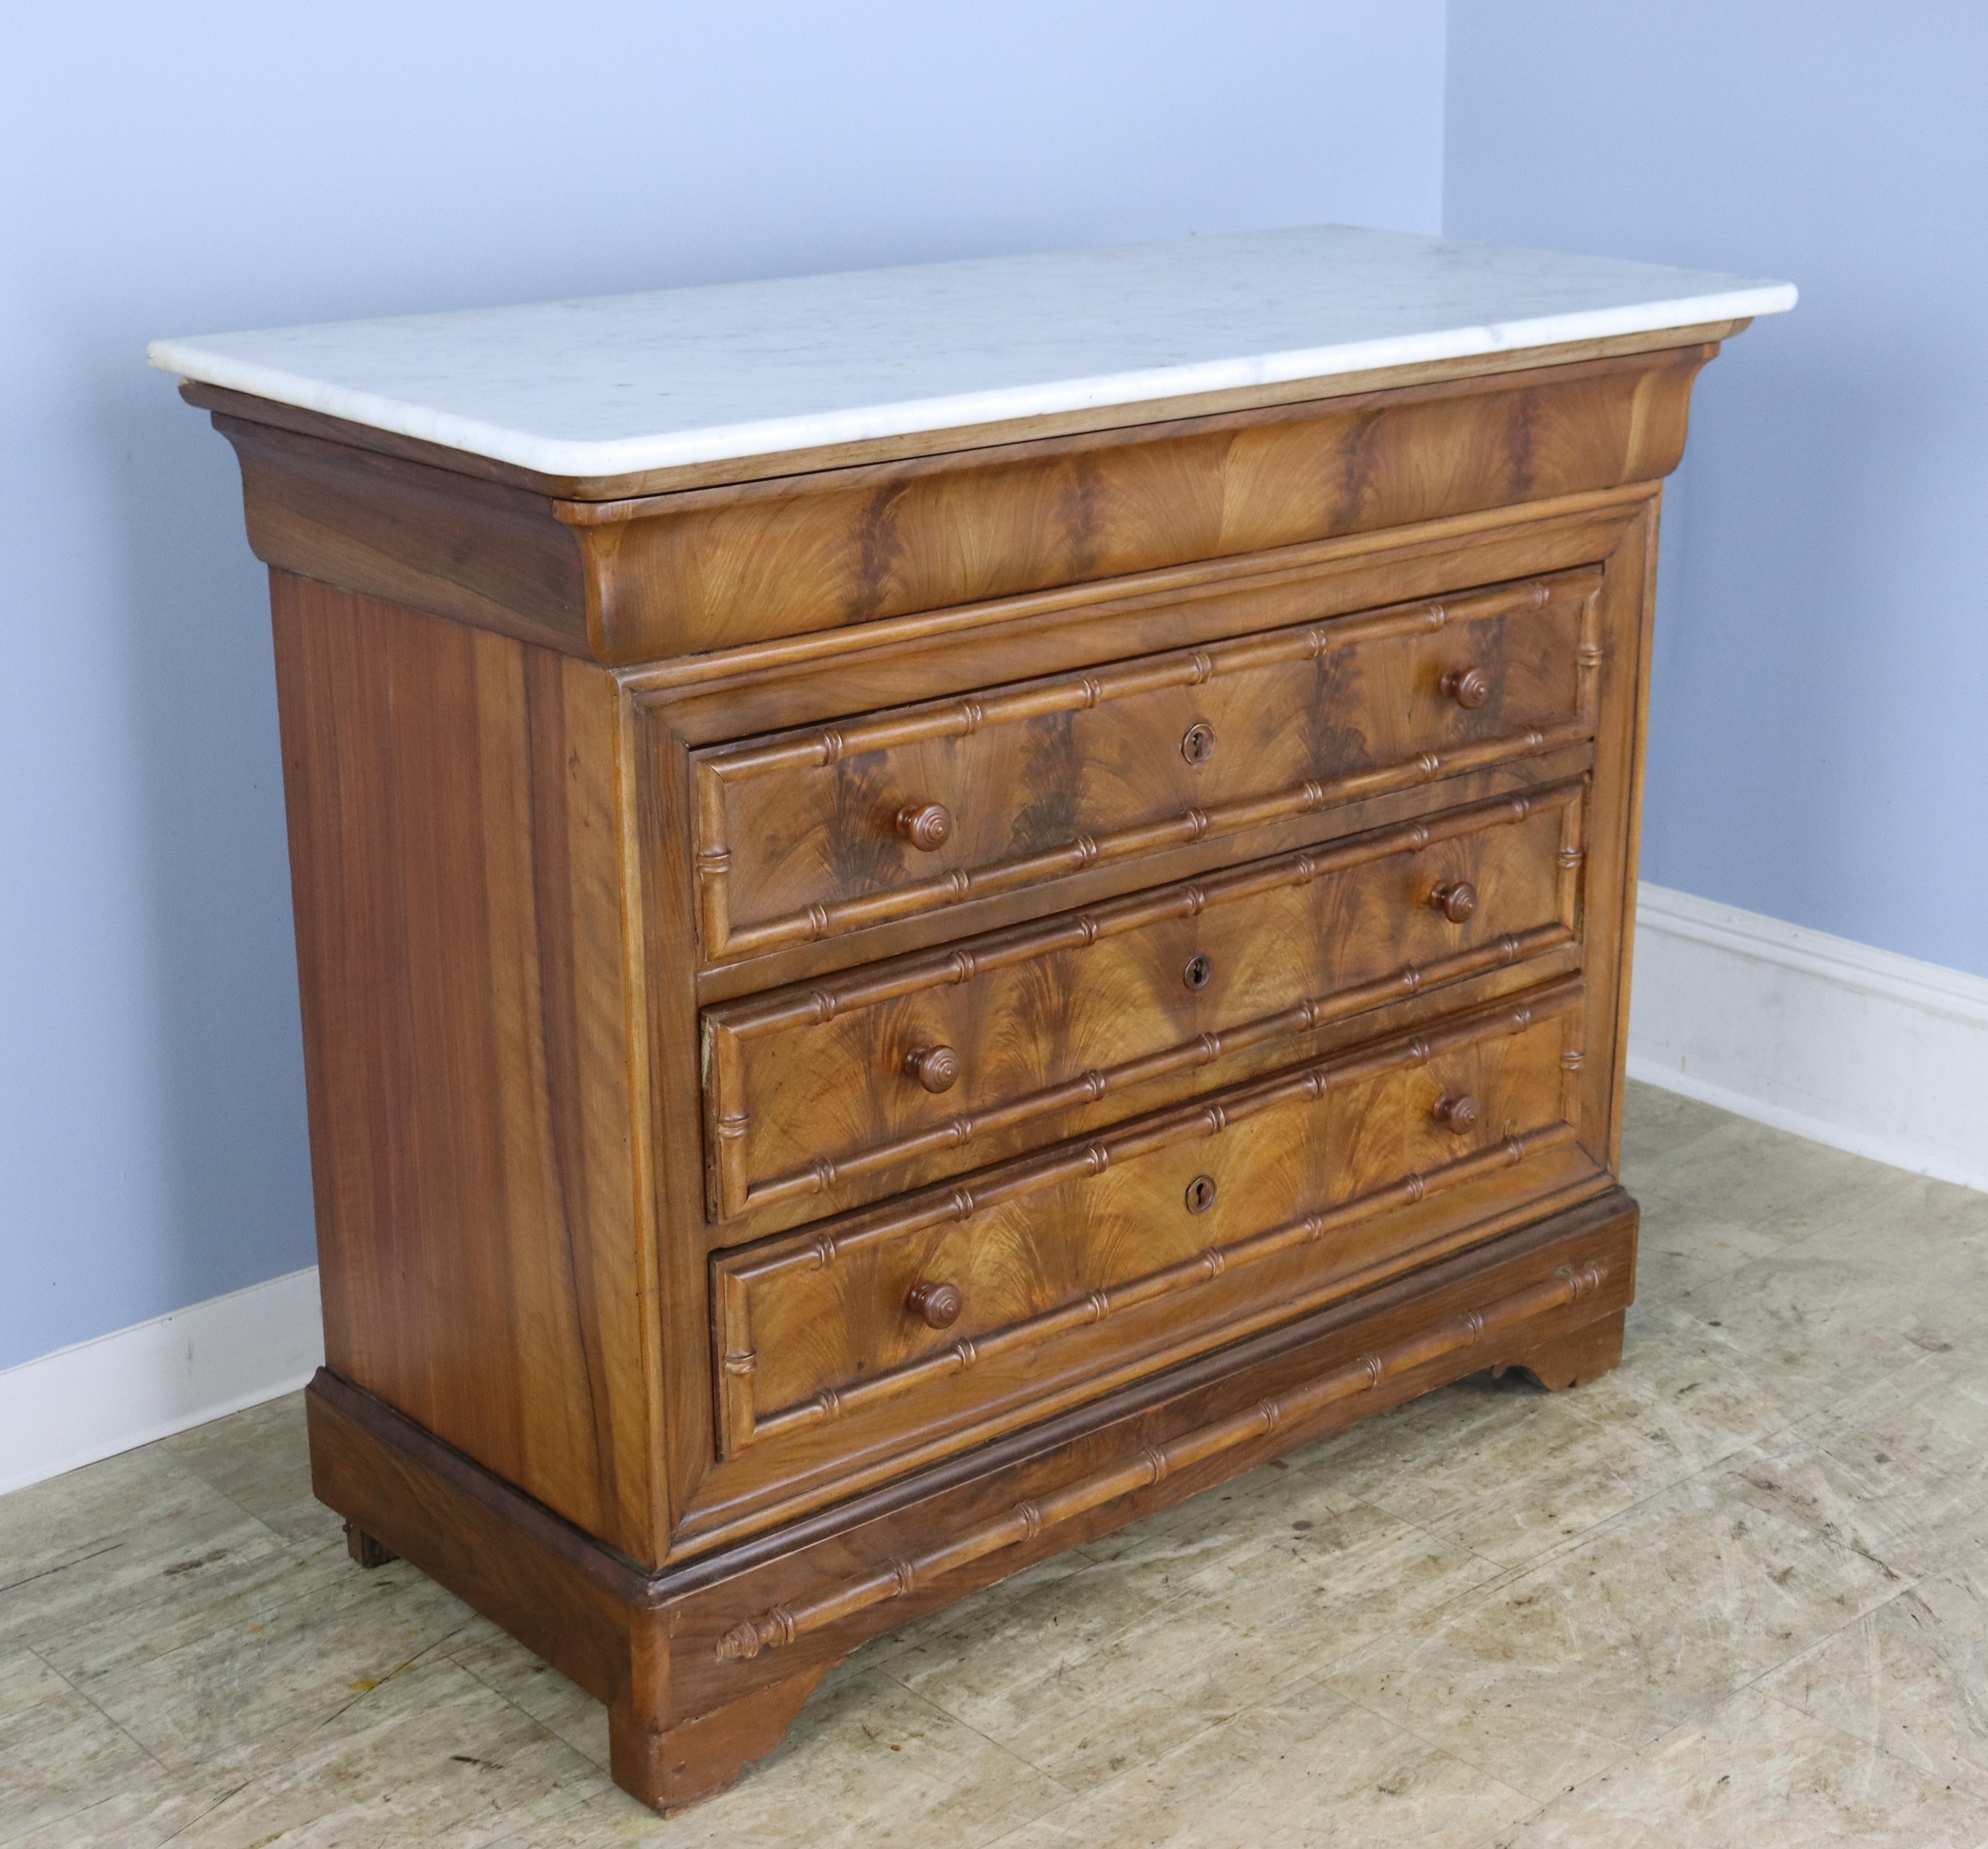 A French chest of drawers in the Louis Philippe style with faux bamboo trim and mouldings, with spectacular walnut grain. Drawers run nicely.  Marble is in good antique condition with some small chips and areas of wear.  Heavy and sturdy.